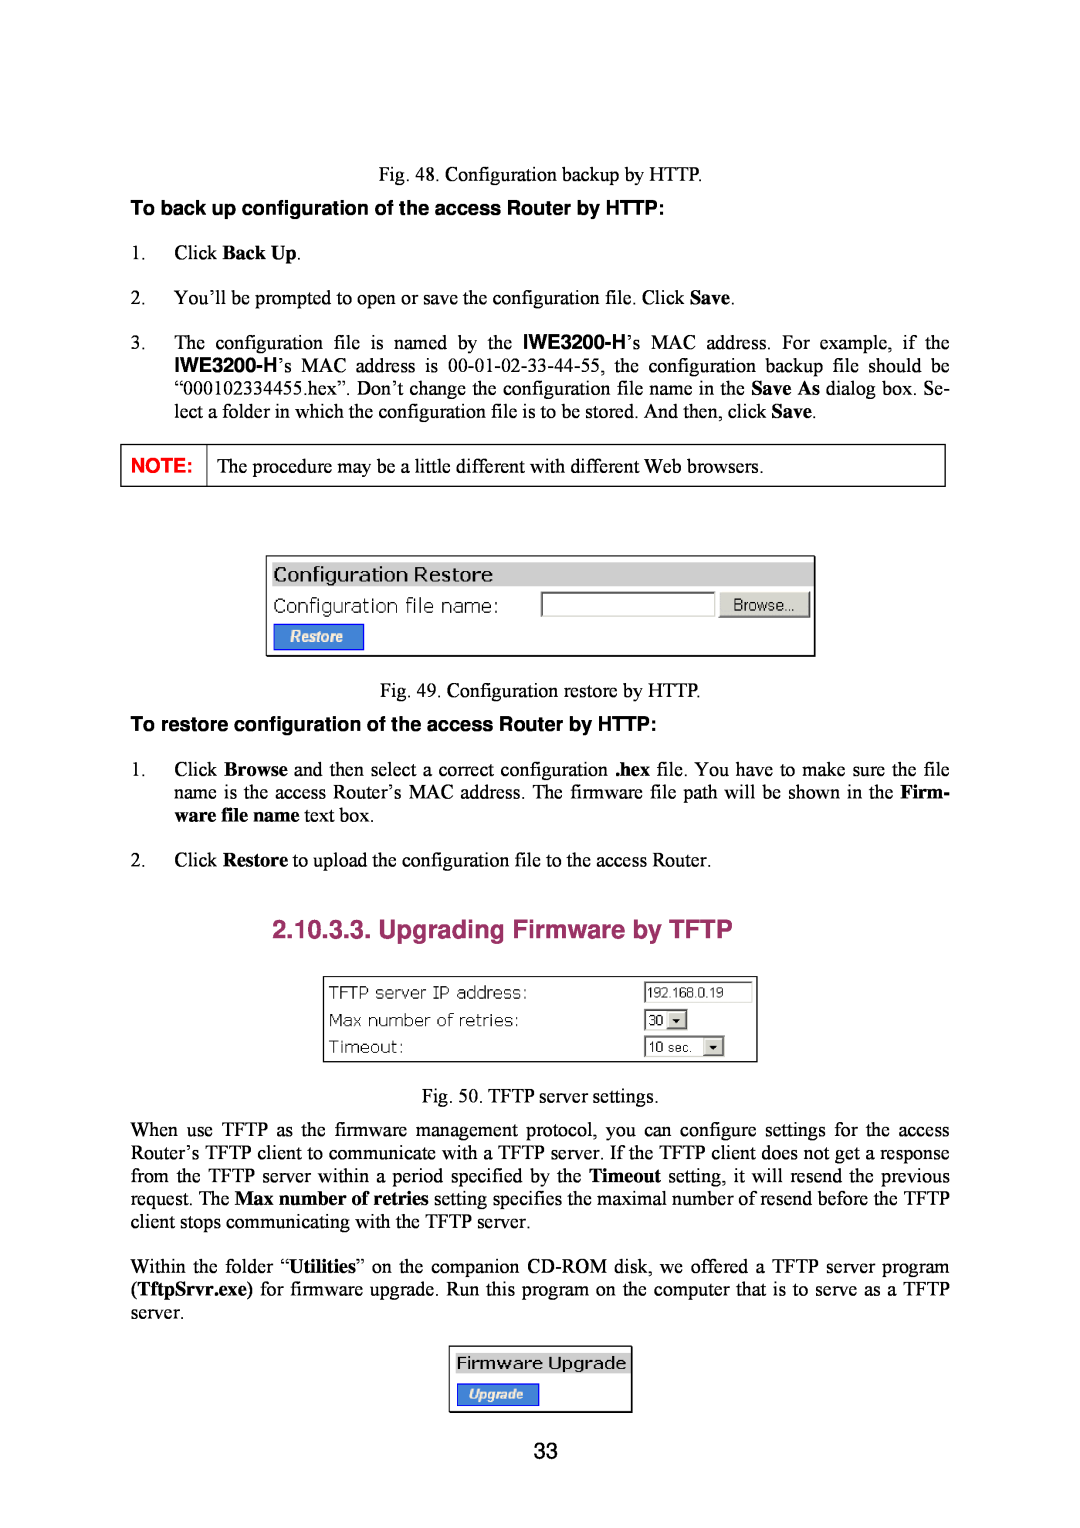 Epson IWE3200-H manual Upgrading Firmware by TFTP 